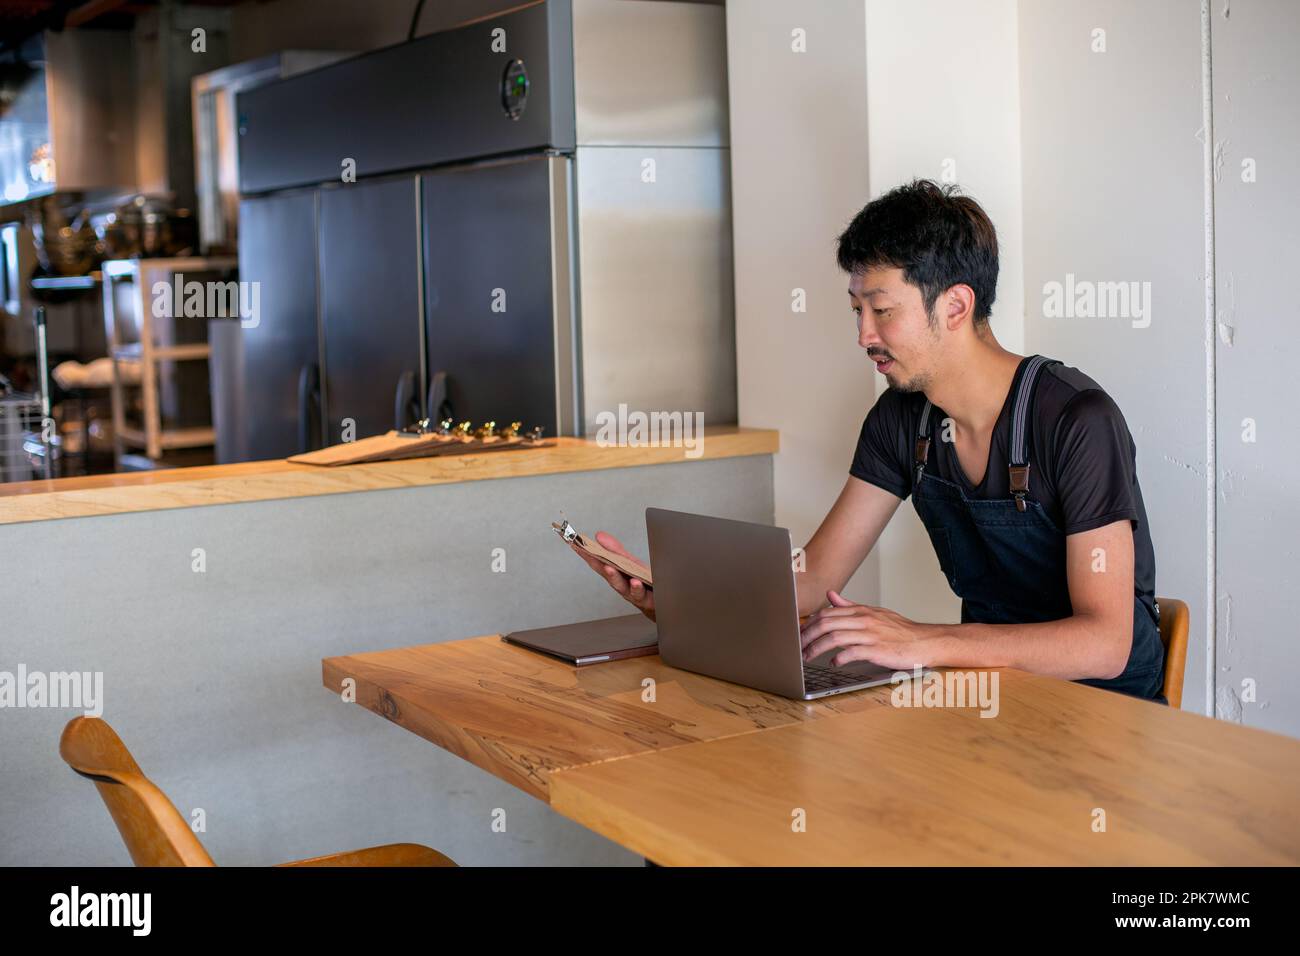 A man seated at a table using a laptop computer, owner and manager of a small restaurant. Stock Photo